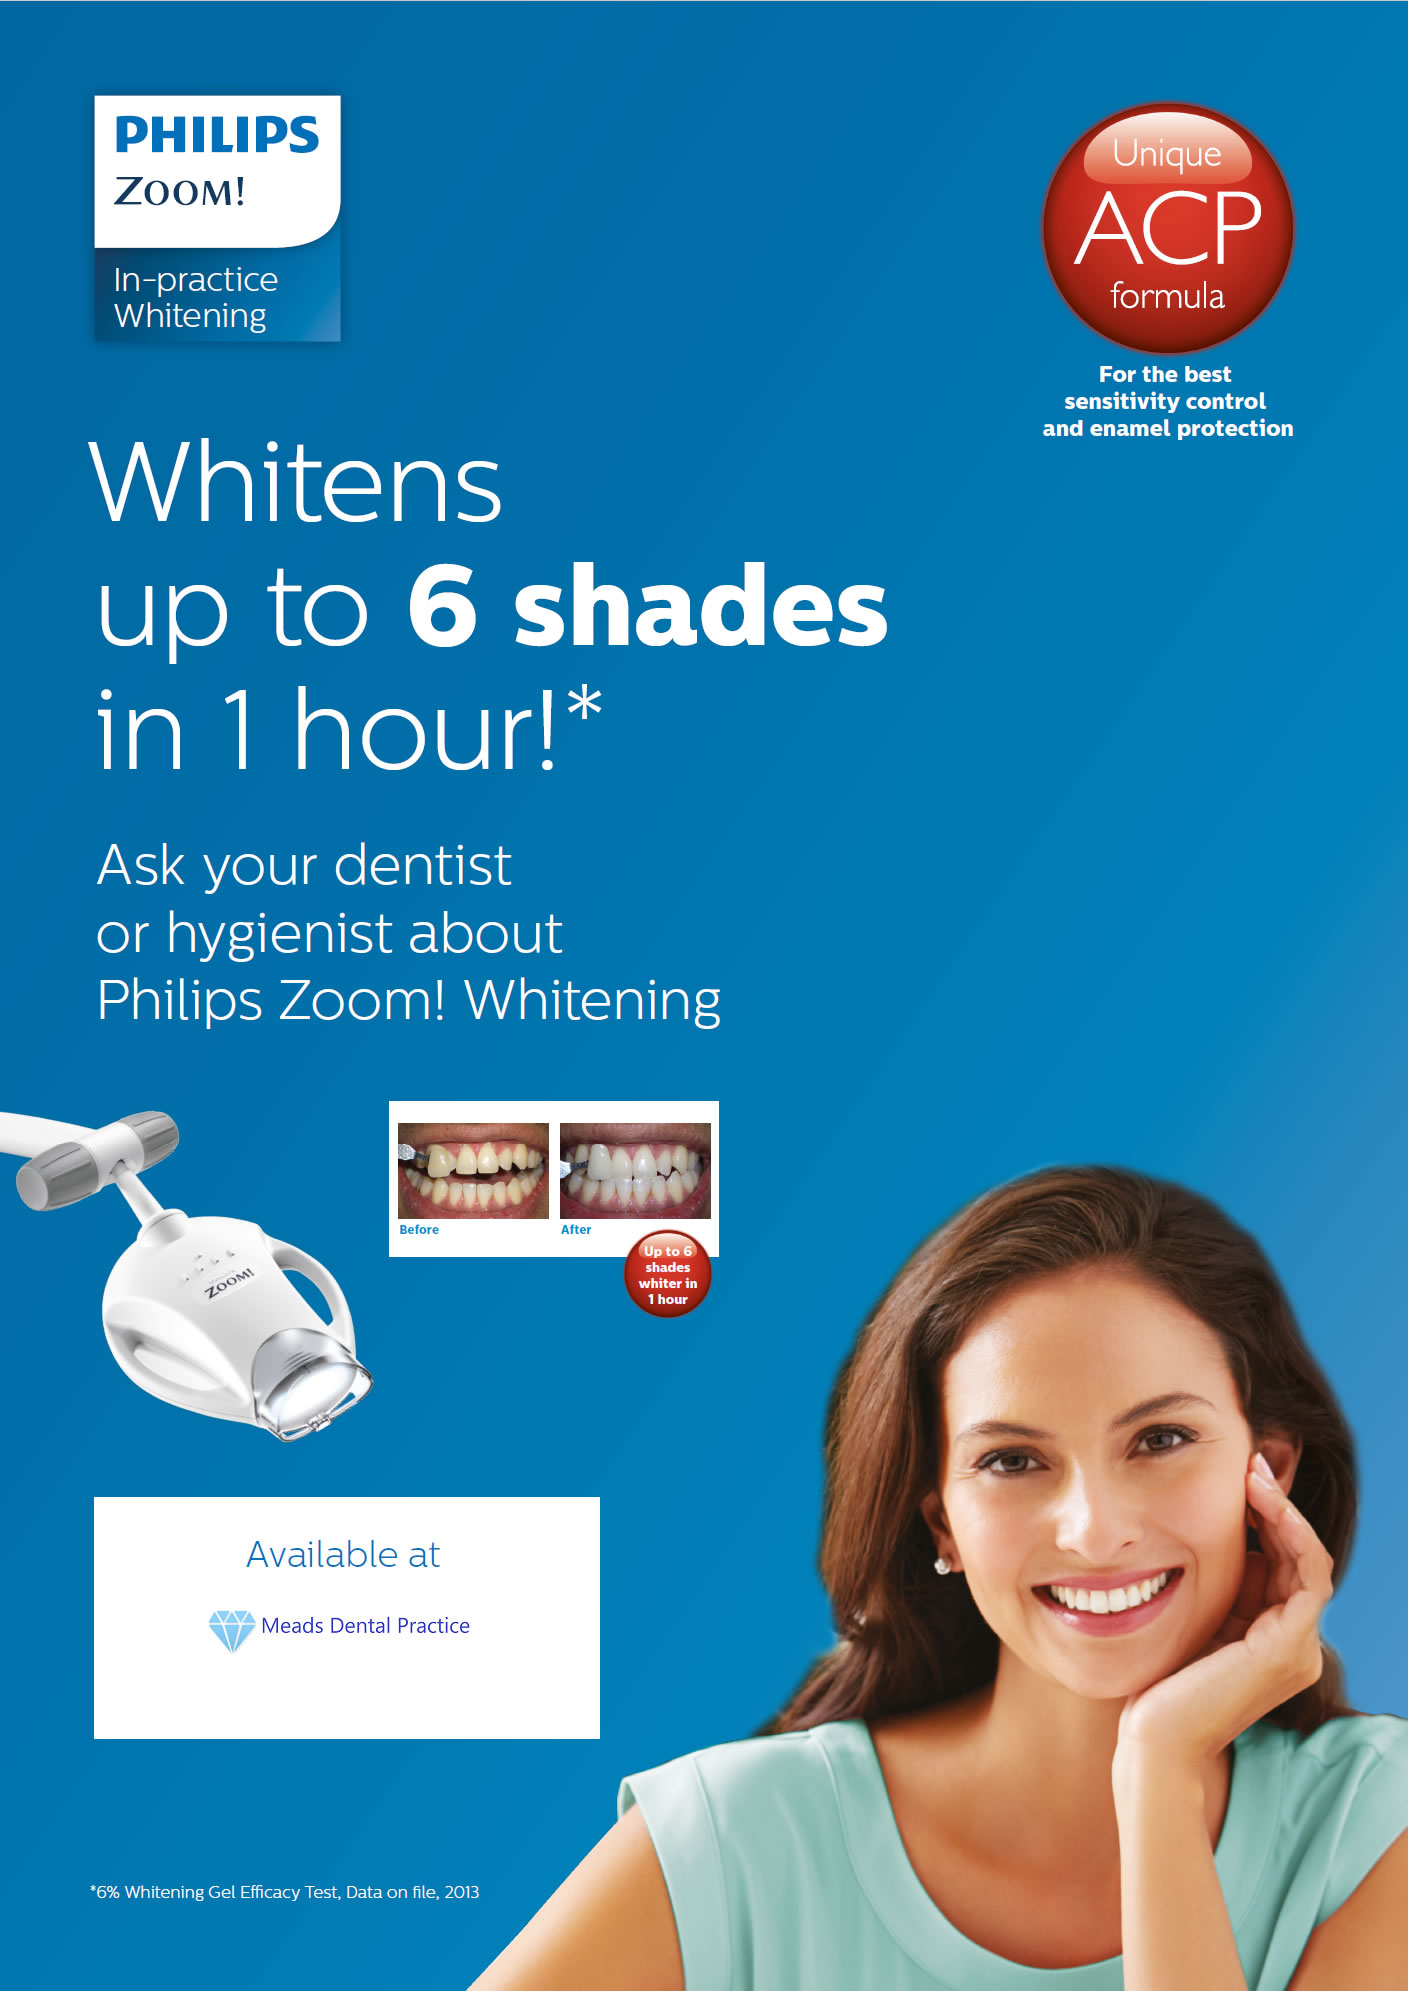 Philips Zoom! Teeth Whitening at Meads Dental Practice in Esher, Surrey